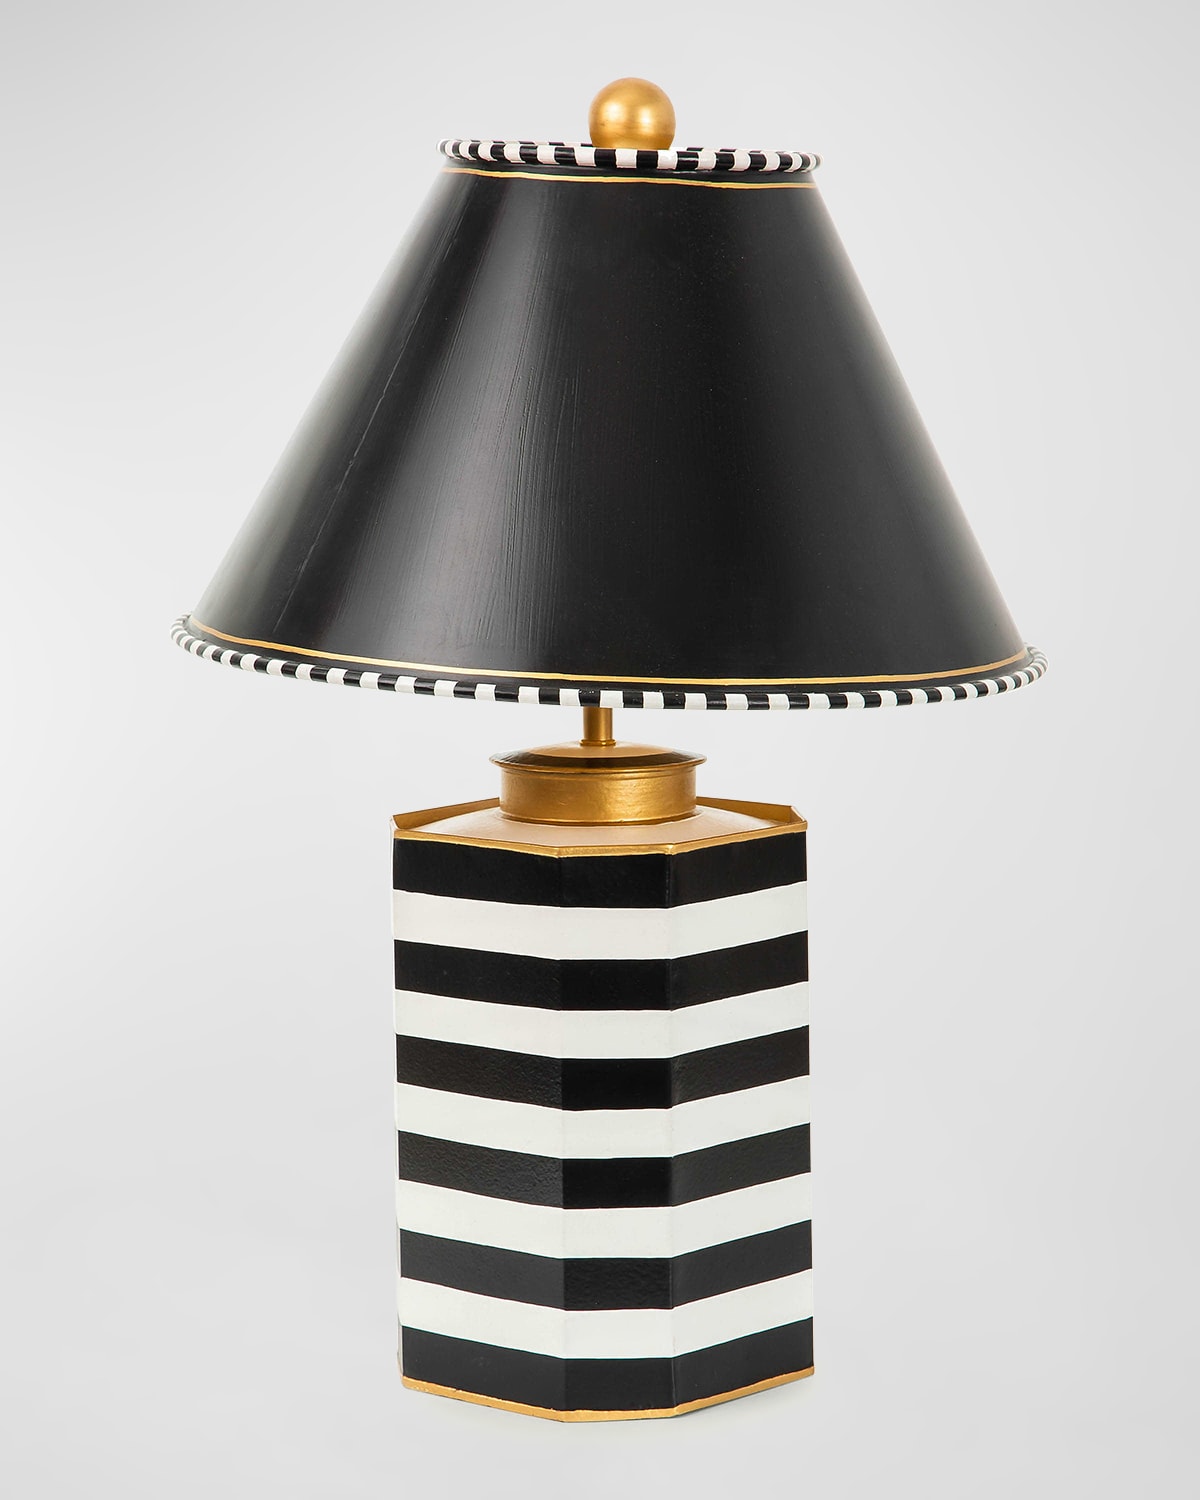 Mackenzie-childs Palisades Table Lamp In Multi